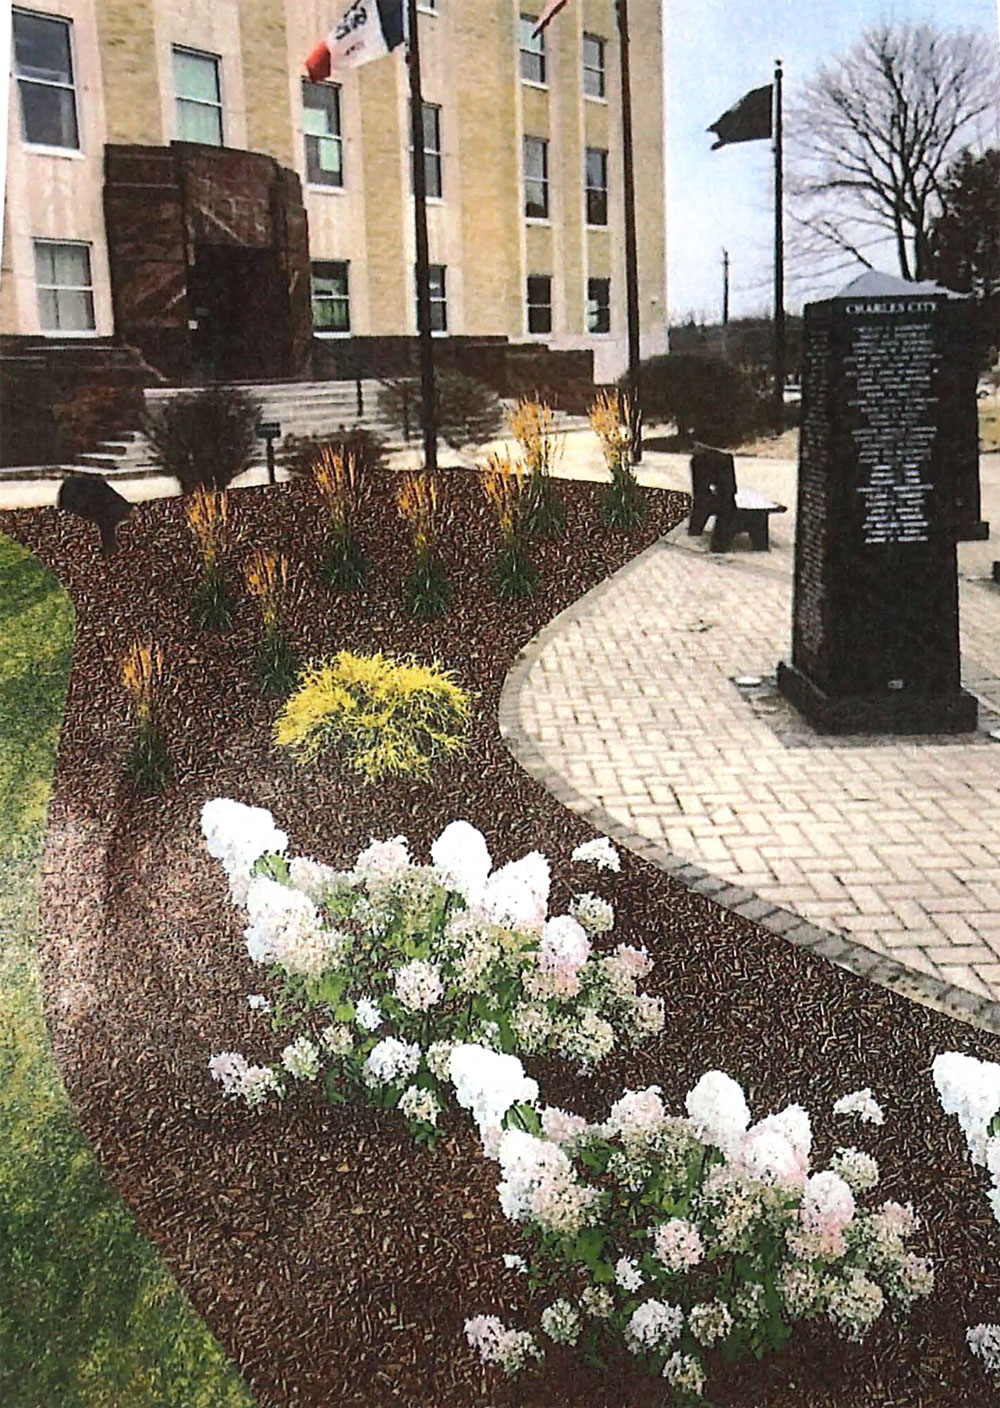 Floyd County Veterans Memorial Committee wants to add flower beds to courthouse display